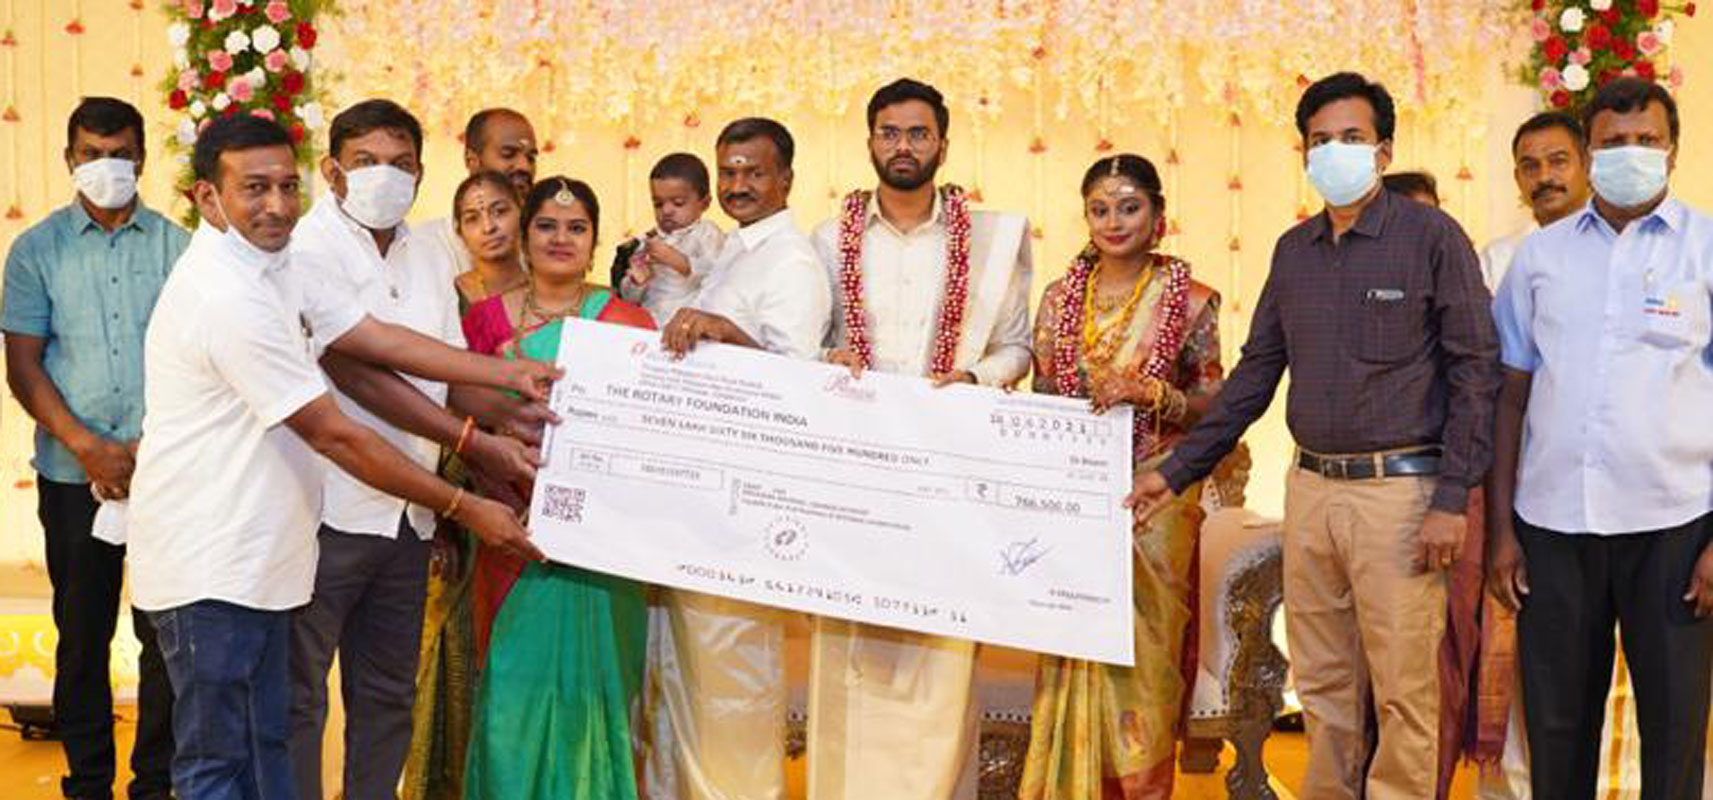 Newly weds Arul Pranesh and Anu donate a portion of their wedding savings to TRF.